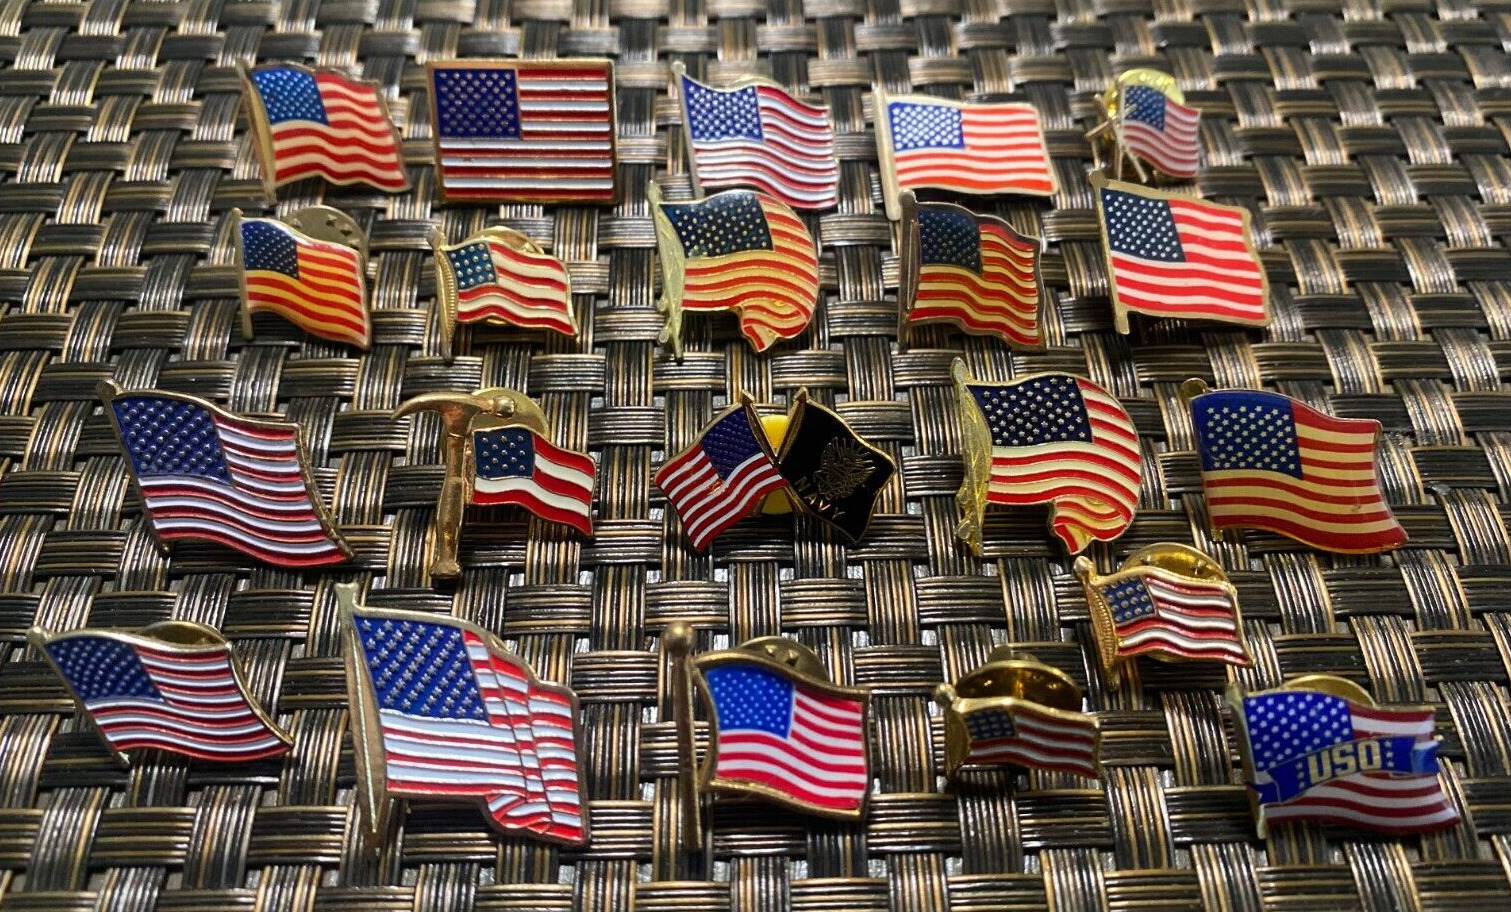 20PC LOT UNITED STATES OF AMERICA USA FLAG PIN COLLECTION L@@K